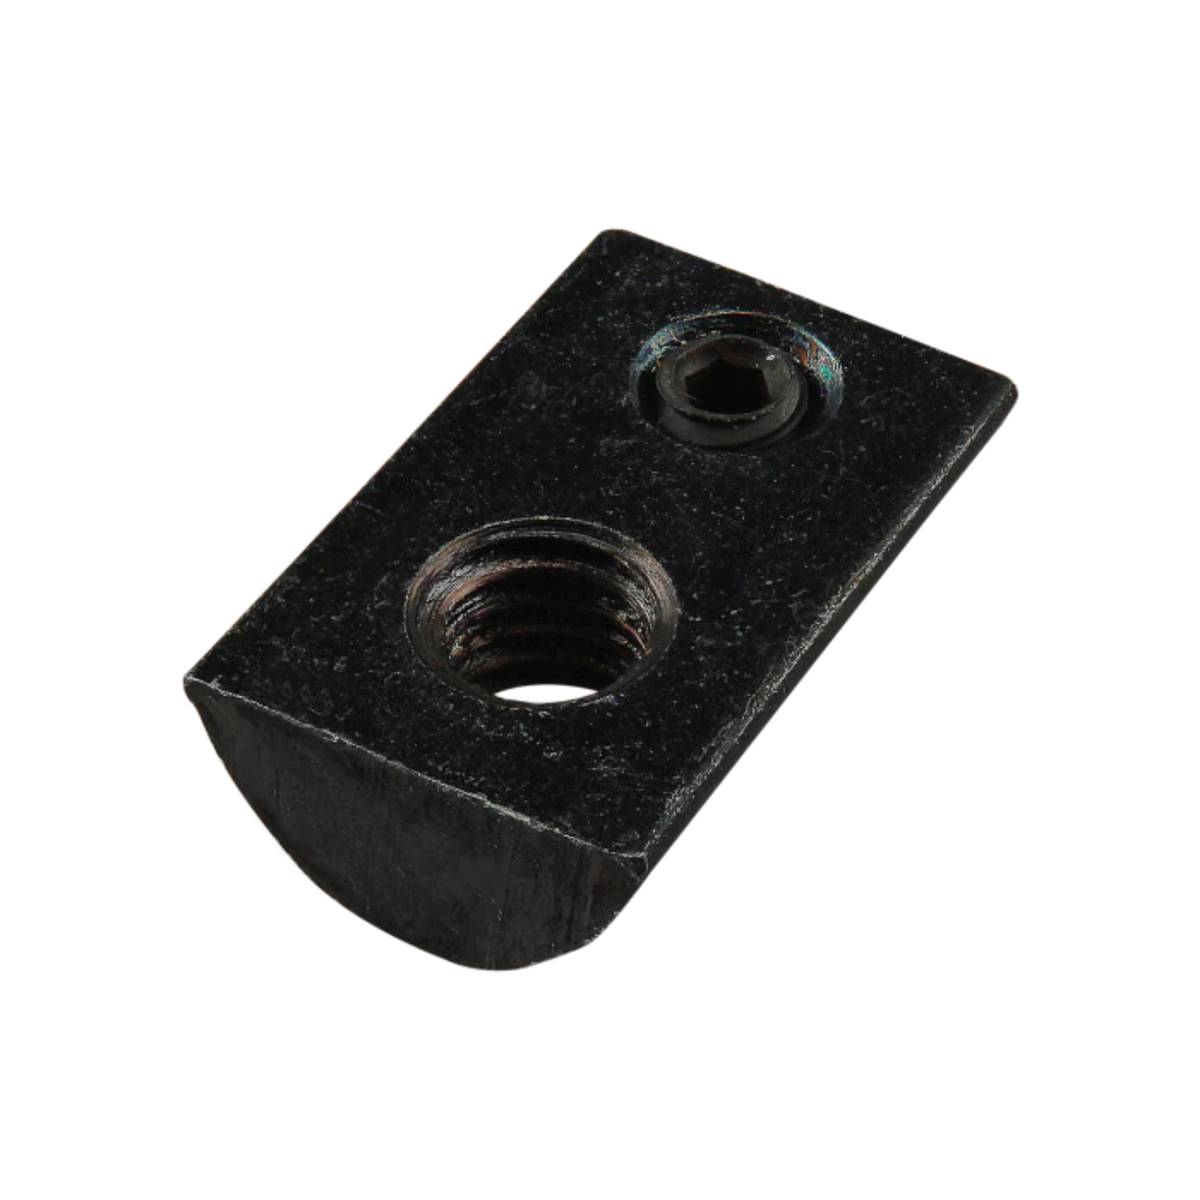 black, rectangular, metal t-nut with a rounded bottom, a flat top, with a threaded hole on one side and a screw set in a hole on the other side